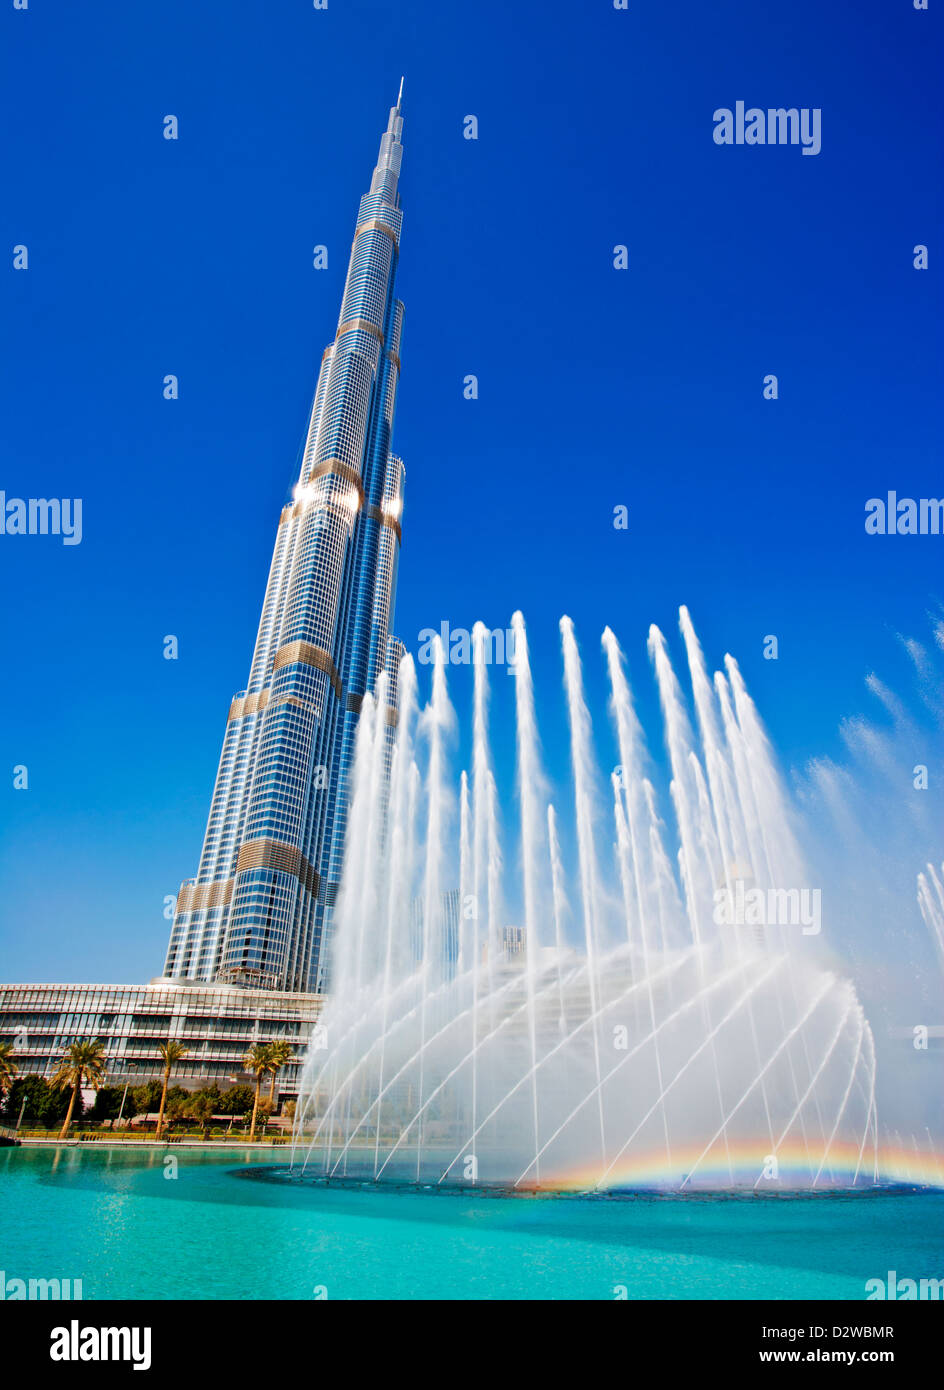 Fountain show in front of the Burj Khalifa, with its 828 meters height it is the tallest building in the world, Dubai, UAE. Stock Photo